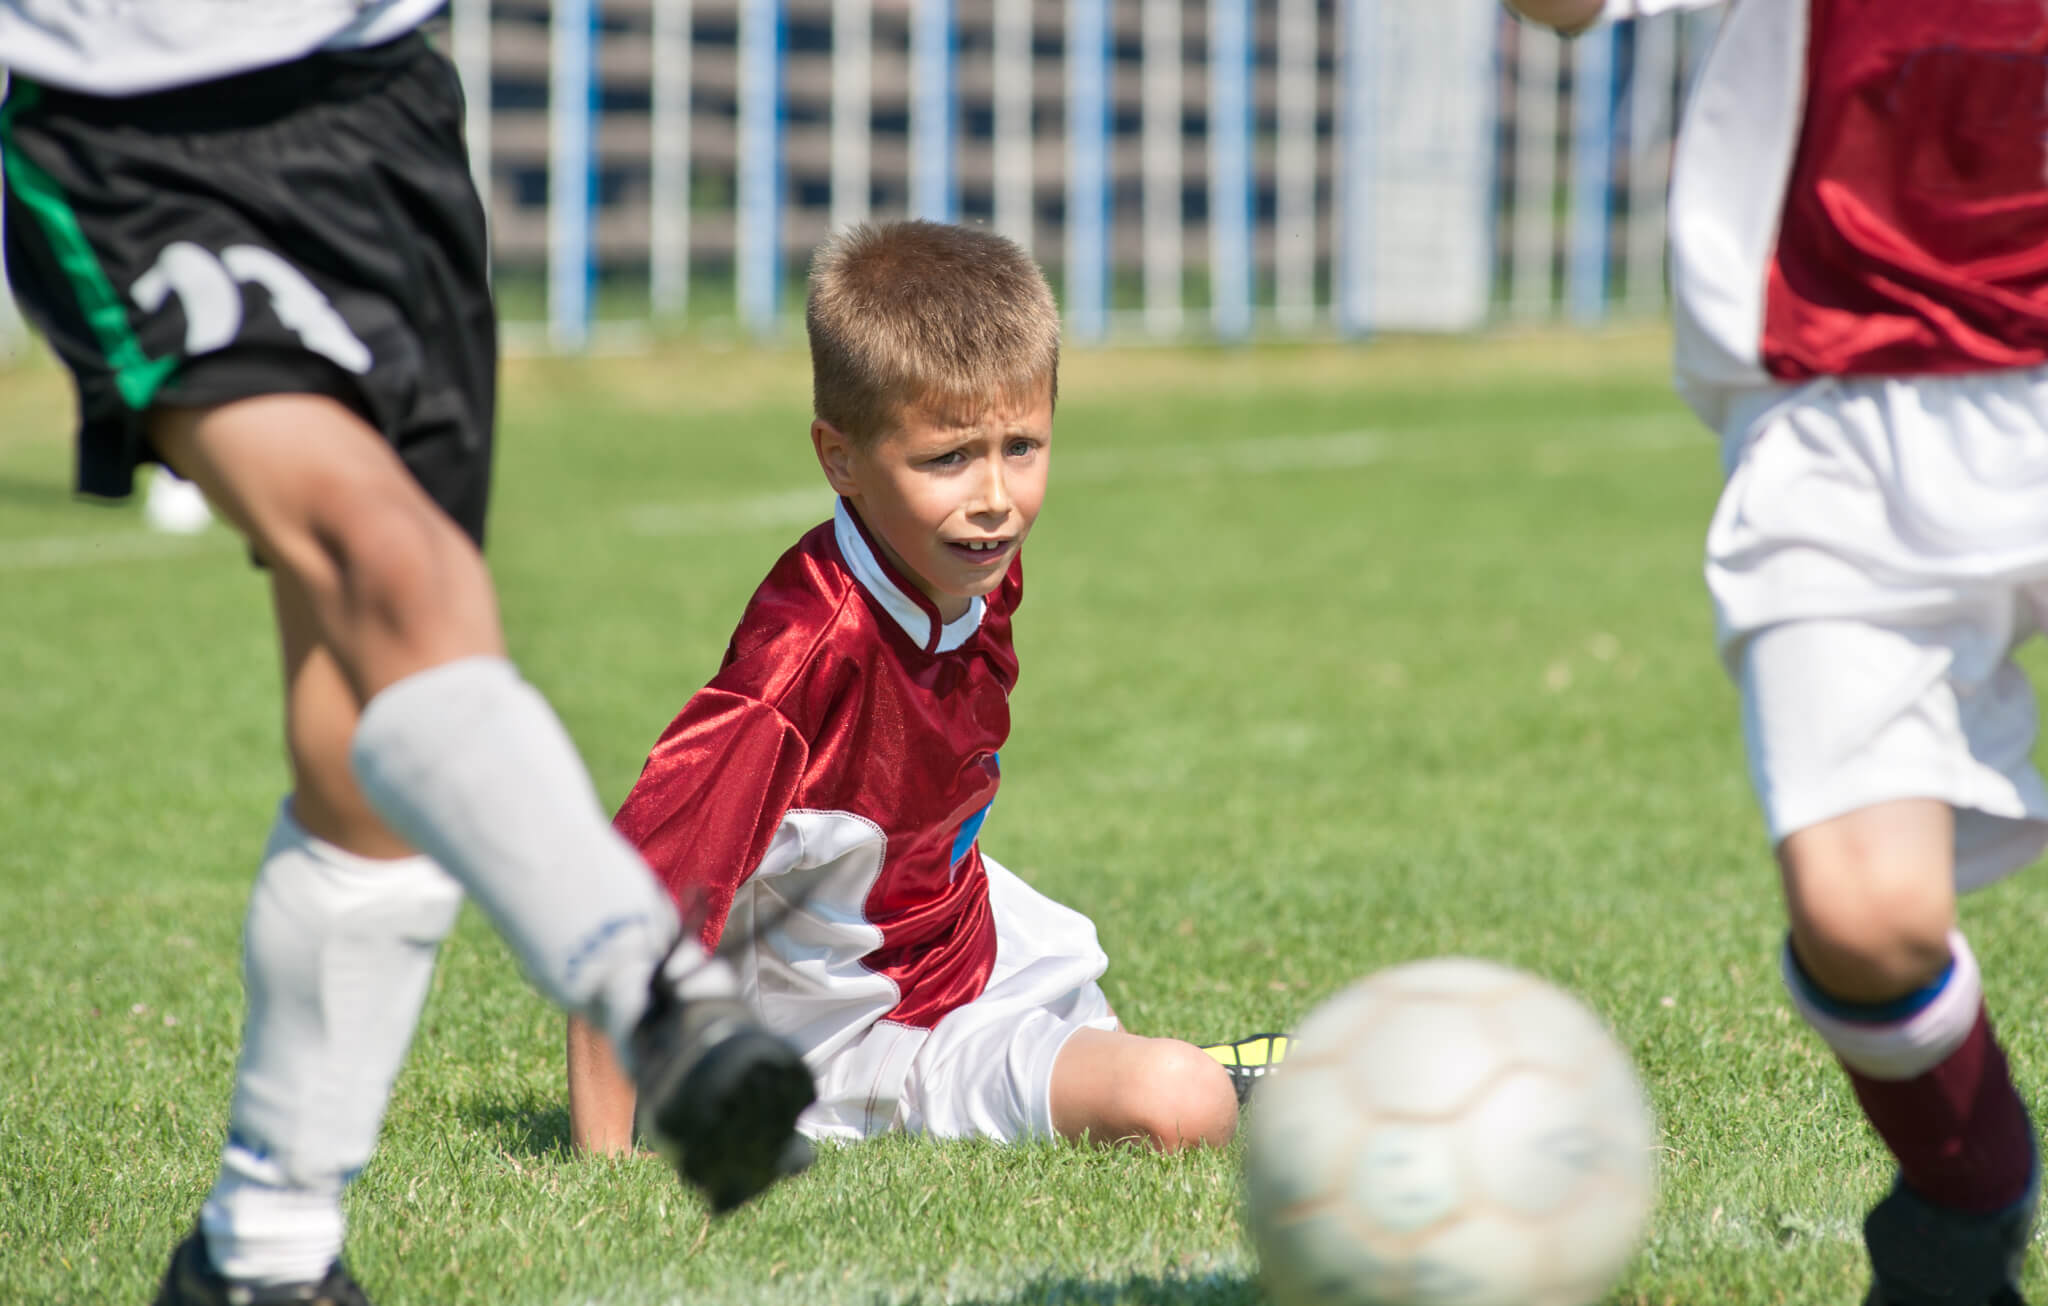 Three Ways Parents Can Help Manage their Athlete's Emotions